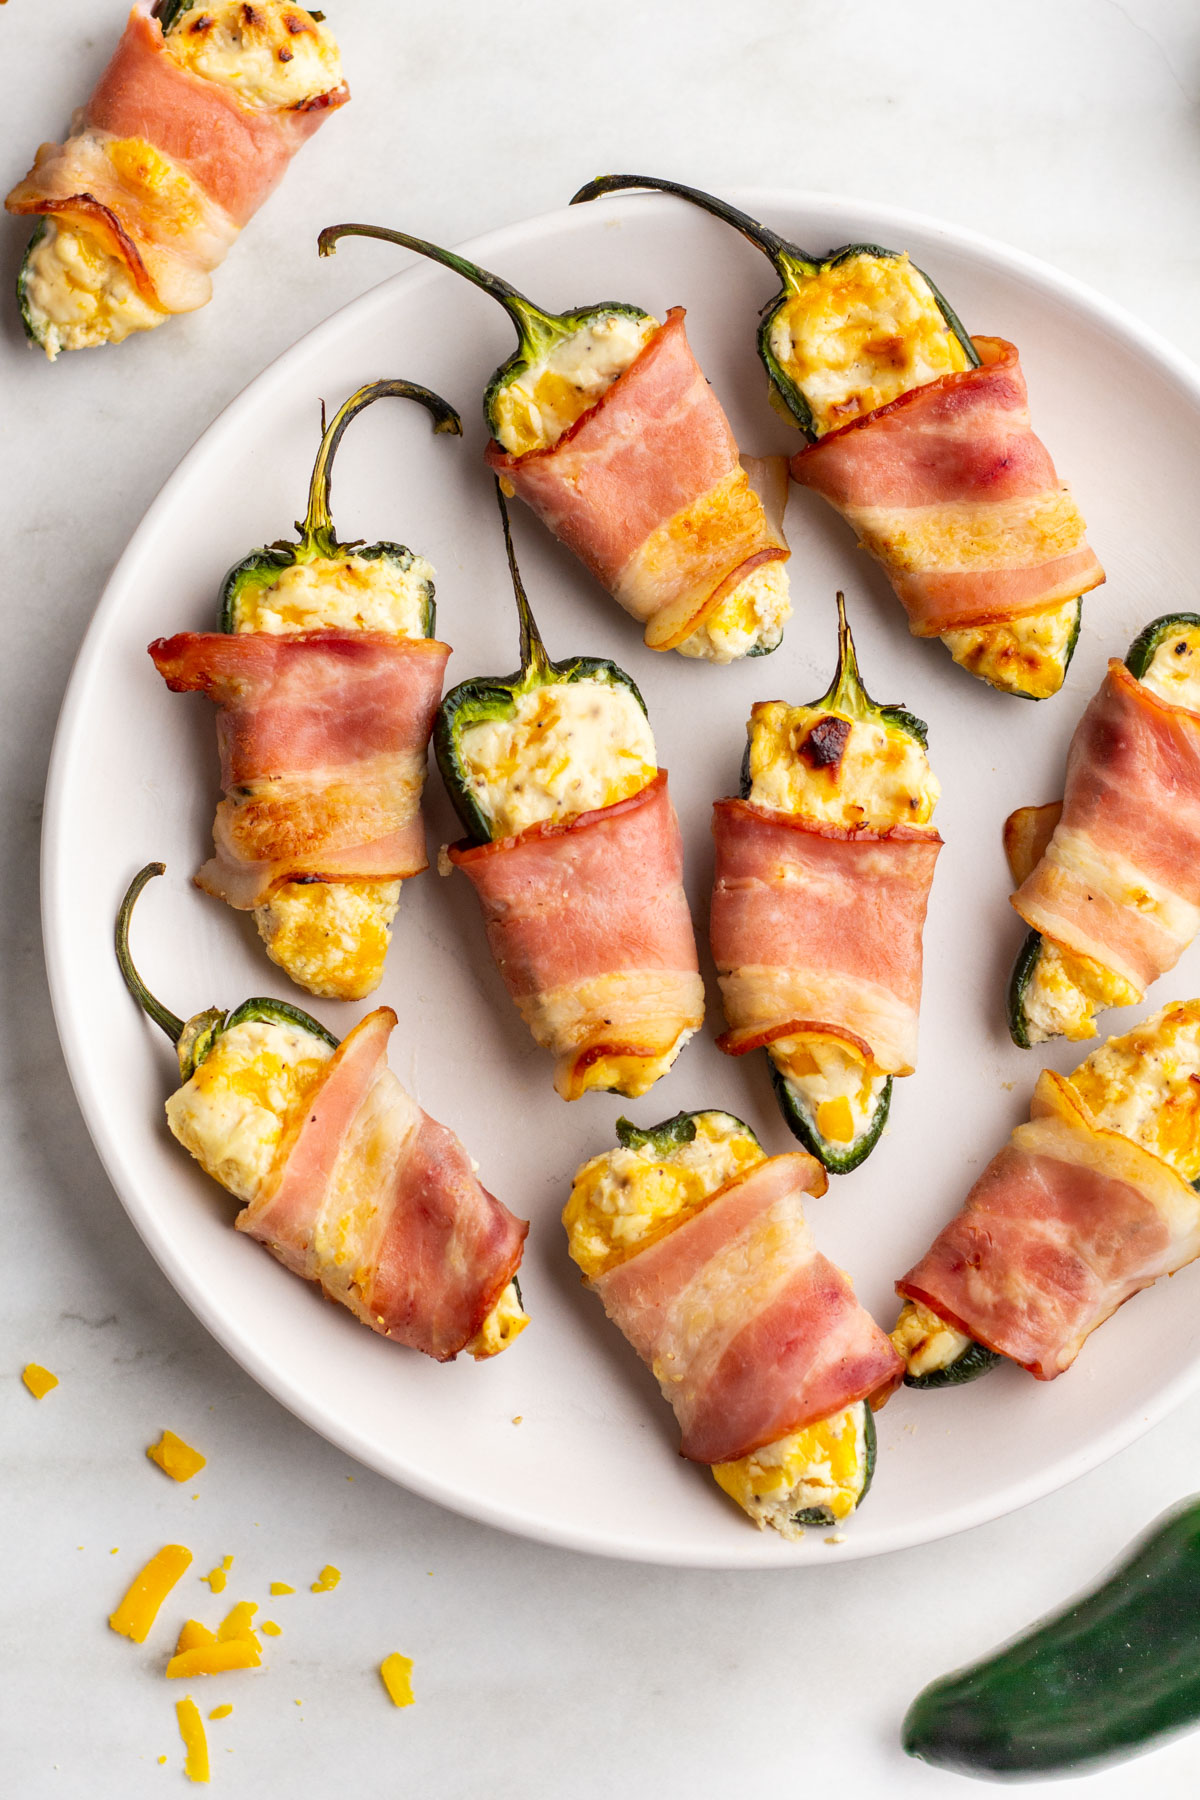 https://www.wholekitchensink.com/wp-content/uploads/2023/01/Air-Fryer-Bacon-Wrapped-Jalapeno-Poppers-18.jpg